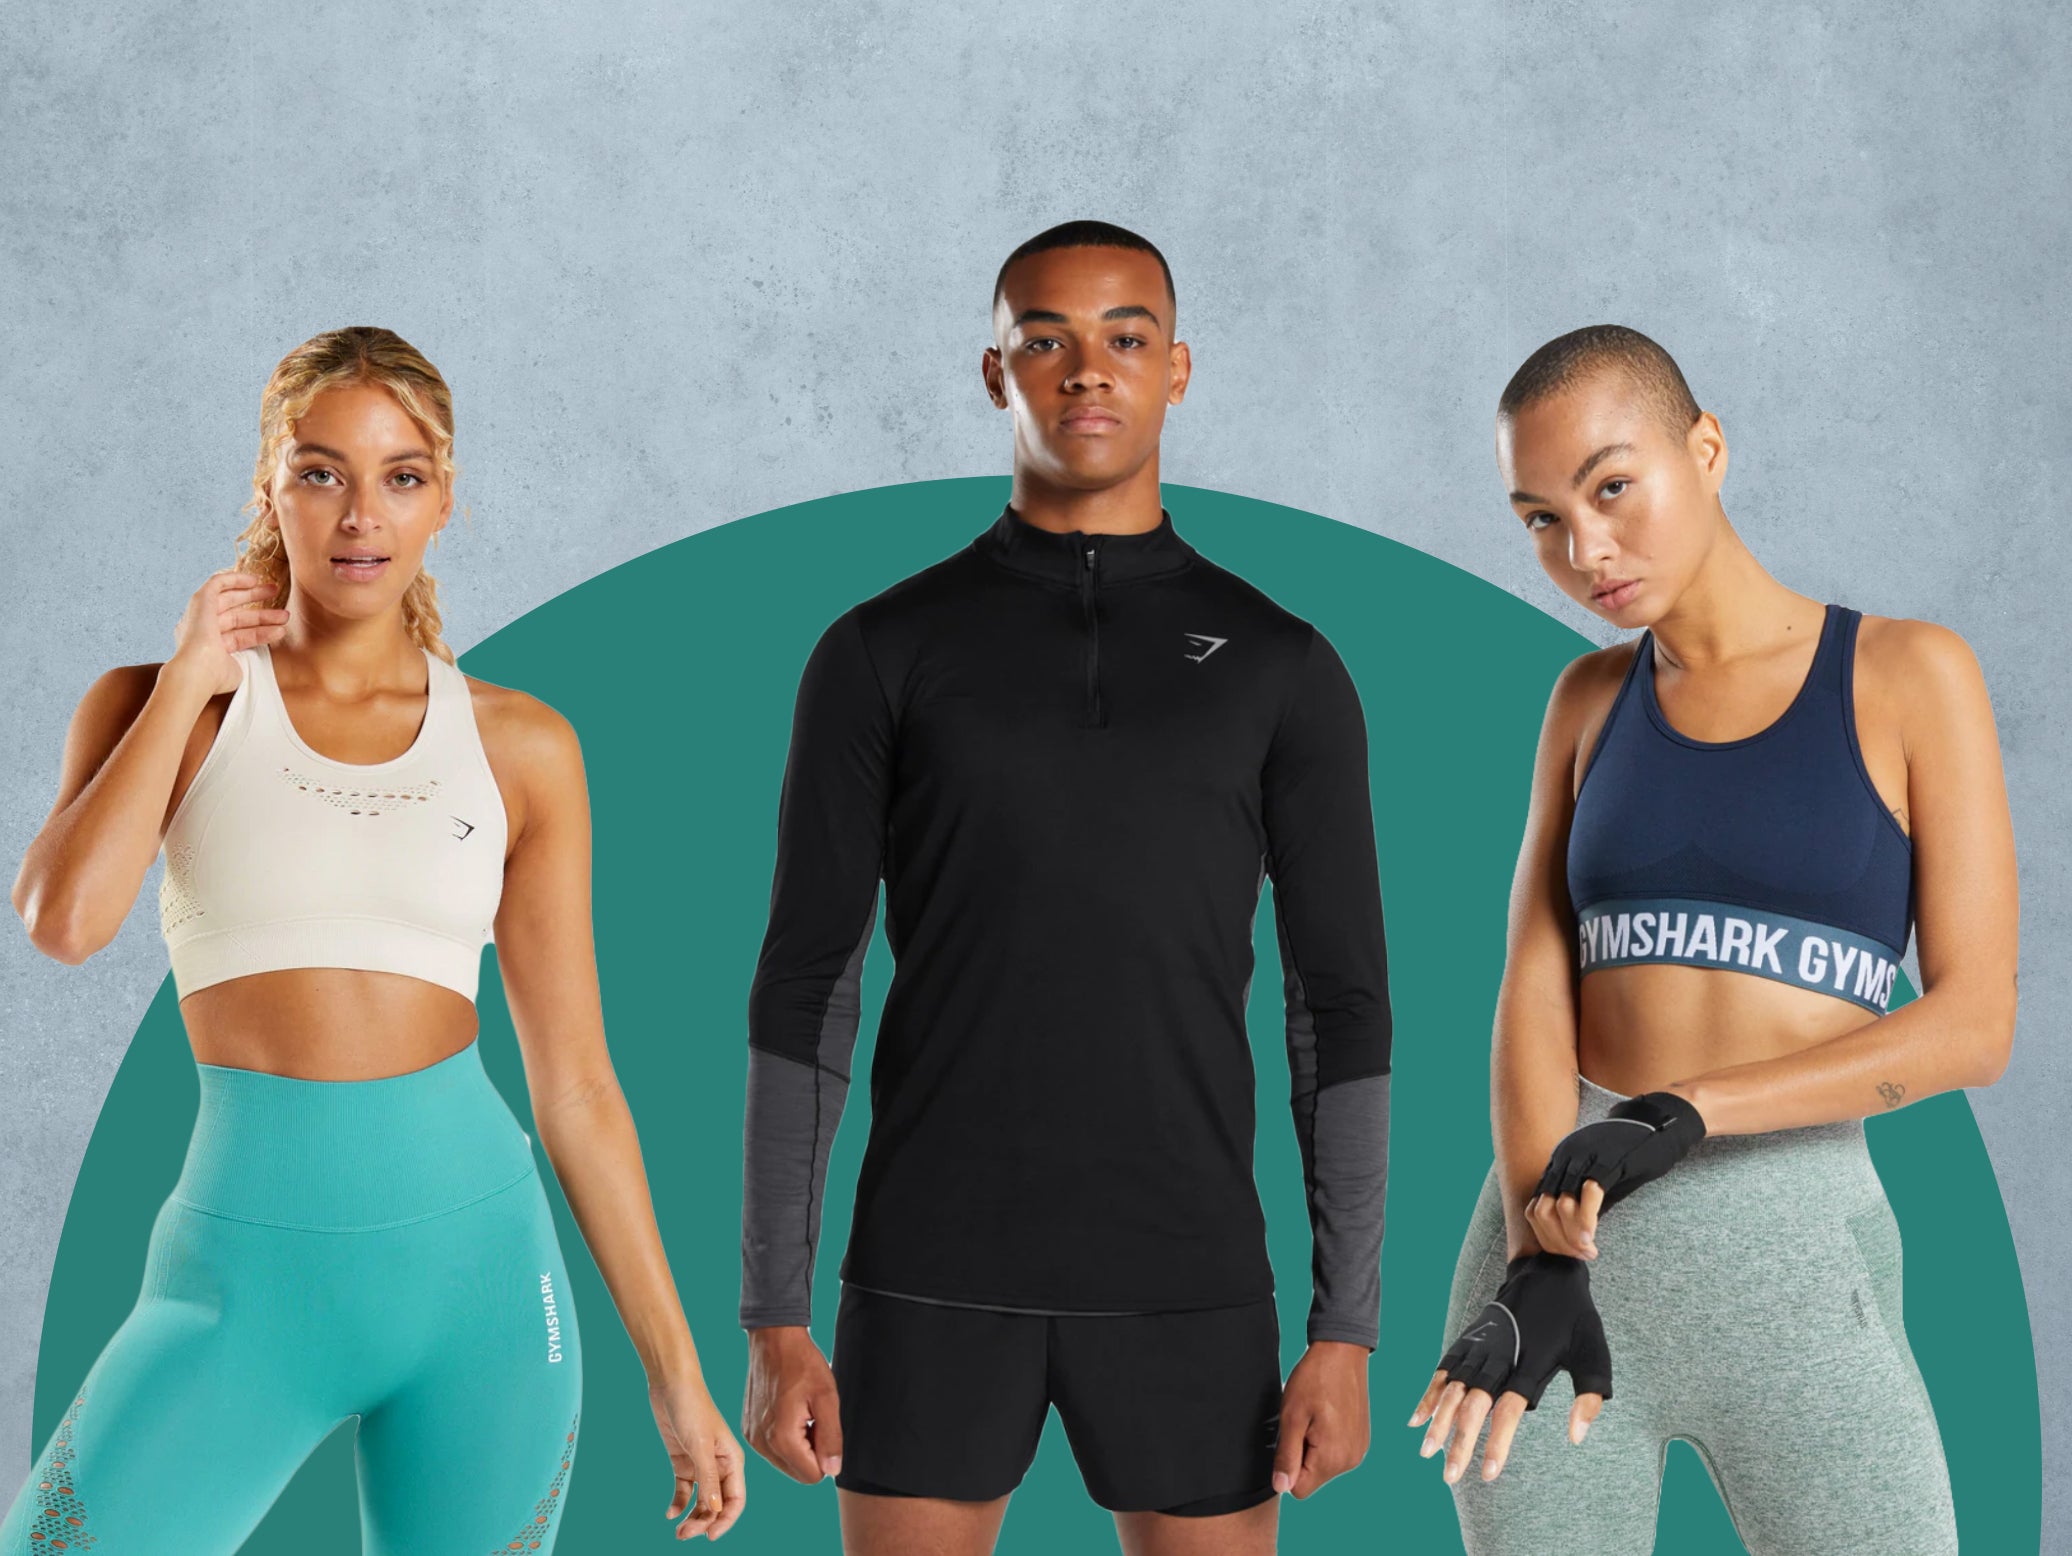 Gymshark summer sale deals Leggings, sports bras and more offers The